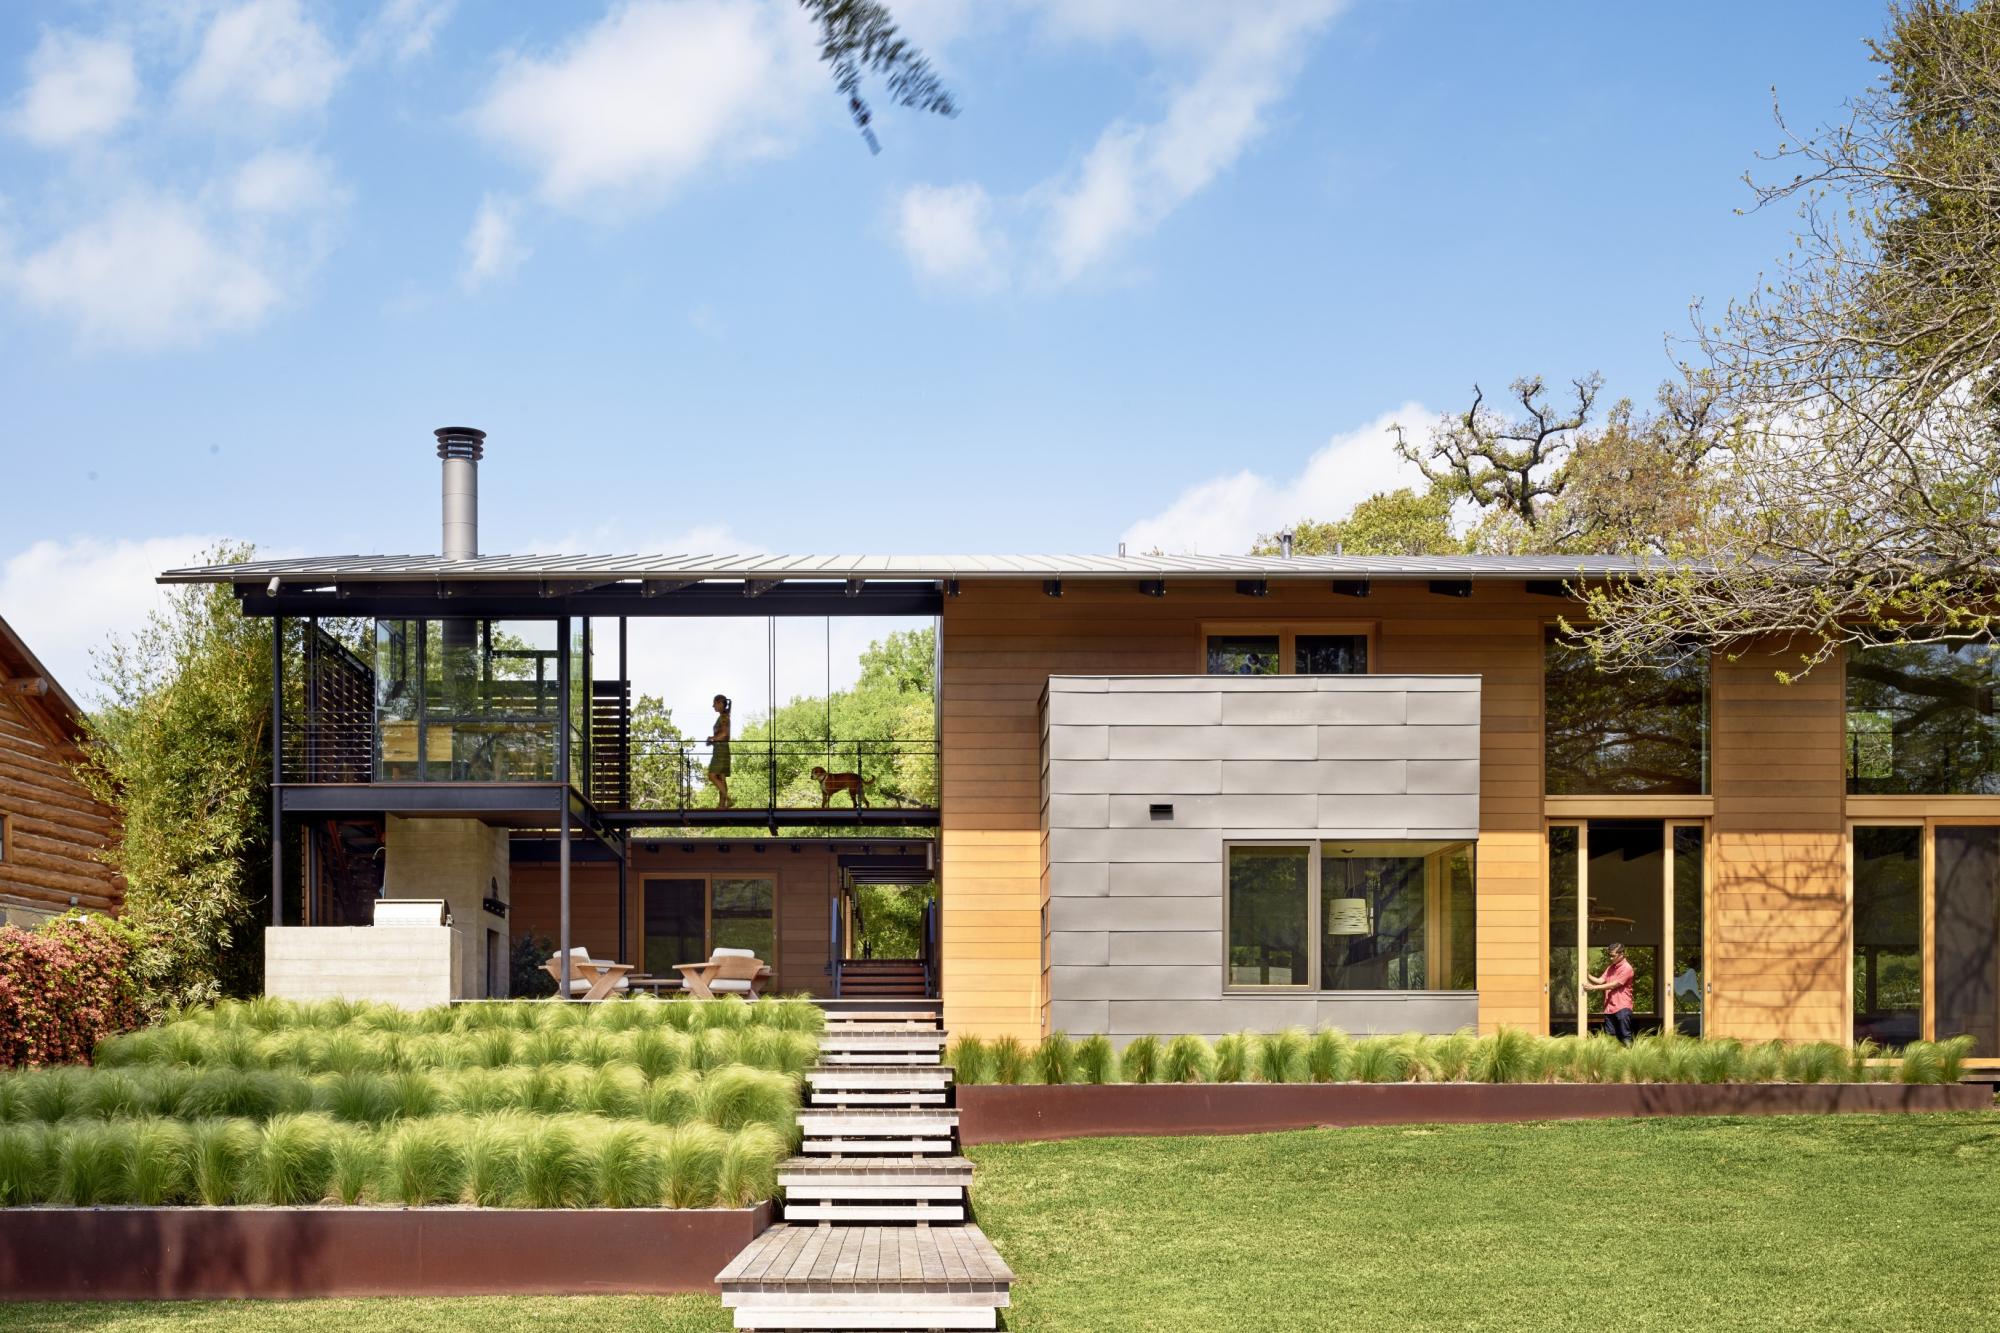 Situated at the confluence of Hog Pen Creek and Lake Austin, Hog Pen Creek Residence was envisioned by its owners as a place that evokes the playfulness of summer on the lake and emphasizes exterior living space. Towering heritage oak trees, a steeply slo